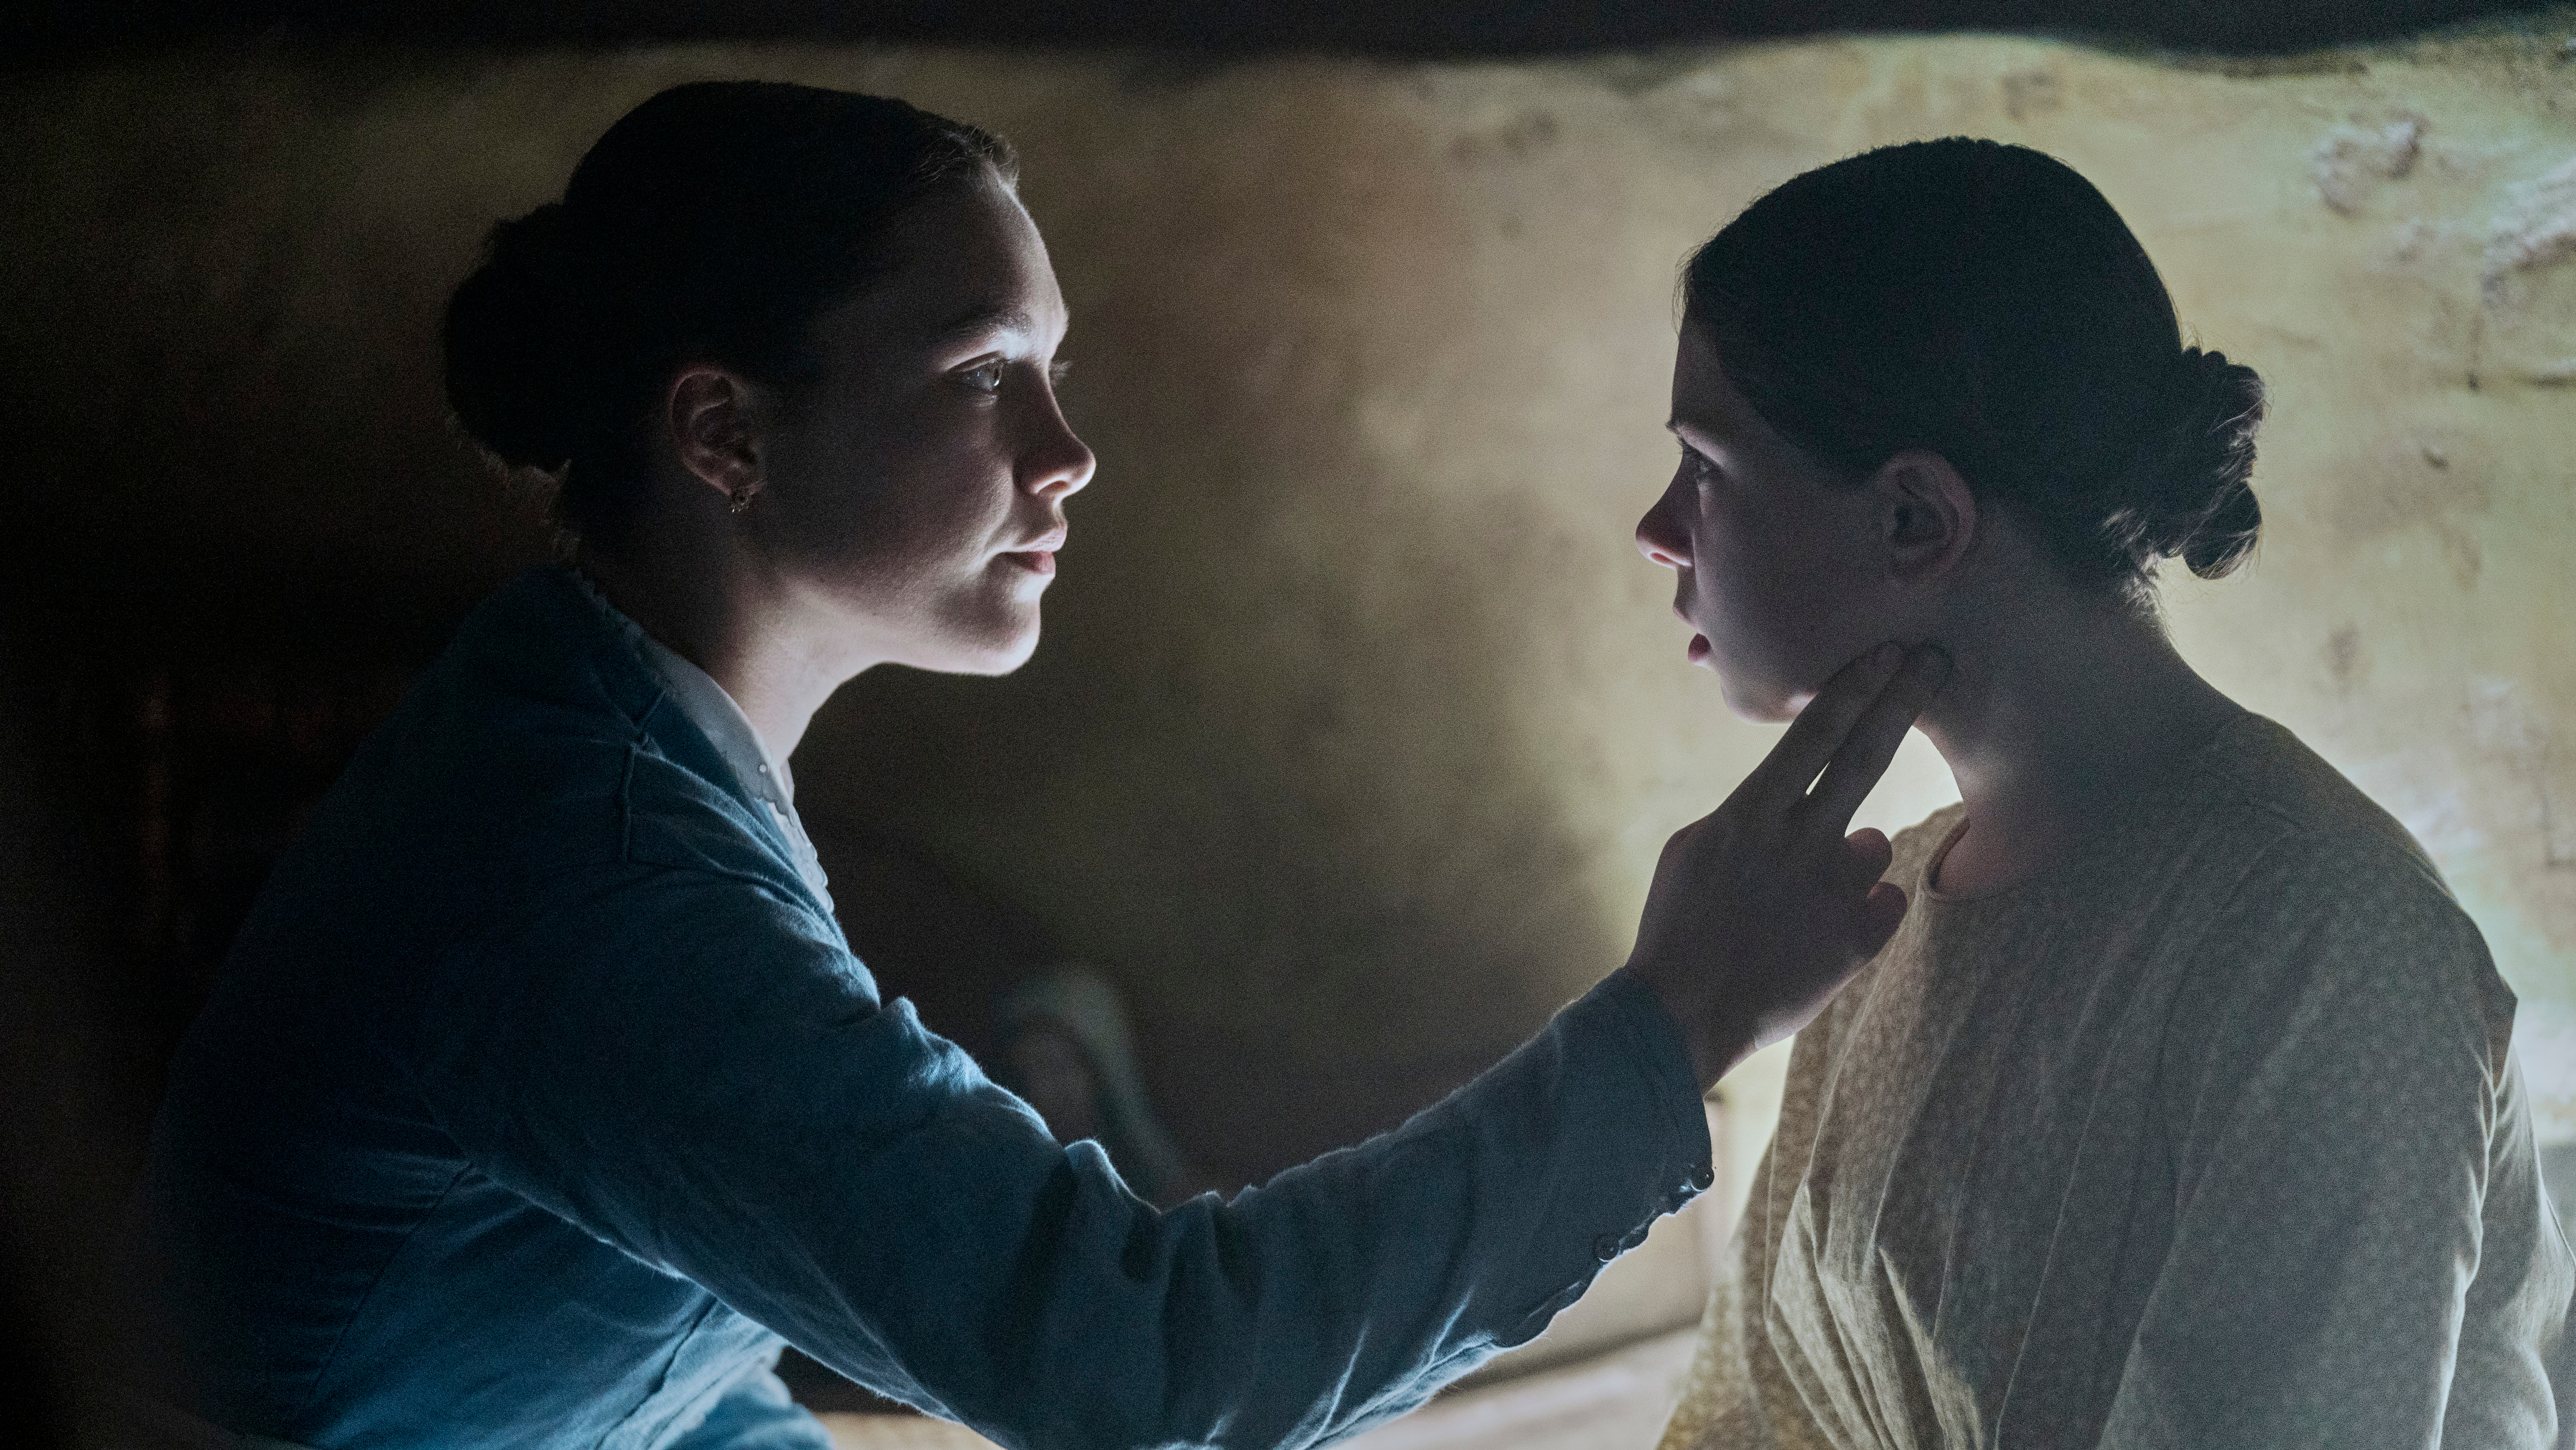 Lib Wright (Florence Pugh) checks the pulse of her patient Anna O’Donnell (Kíla Lord Cassidy) by pressing a finger to her throat in a dark, candlelit room in The Wonder